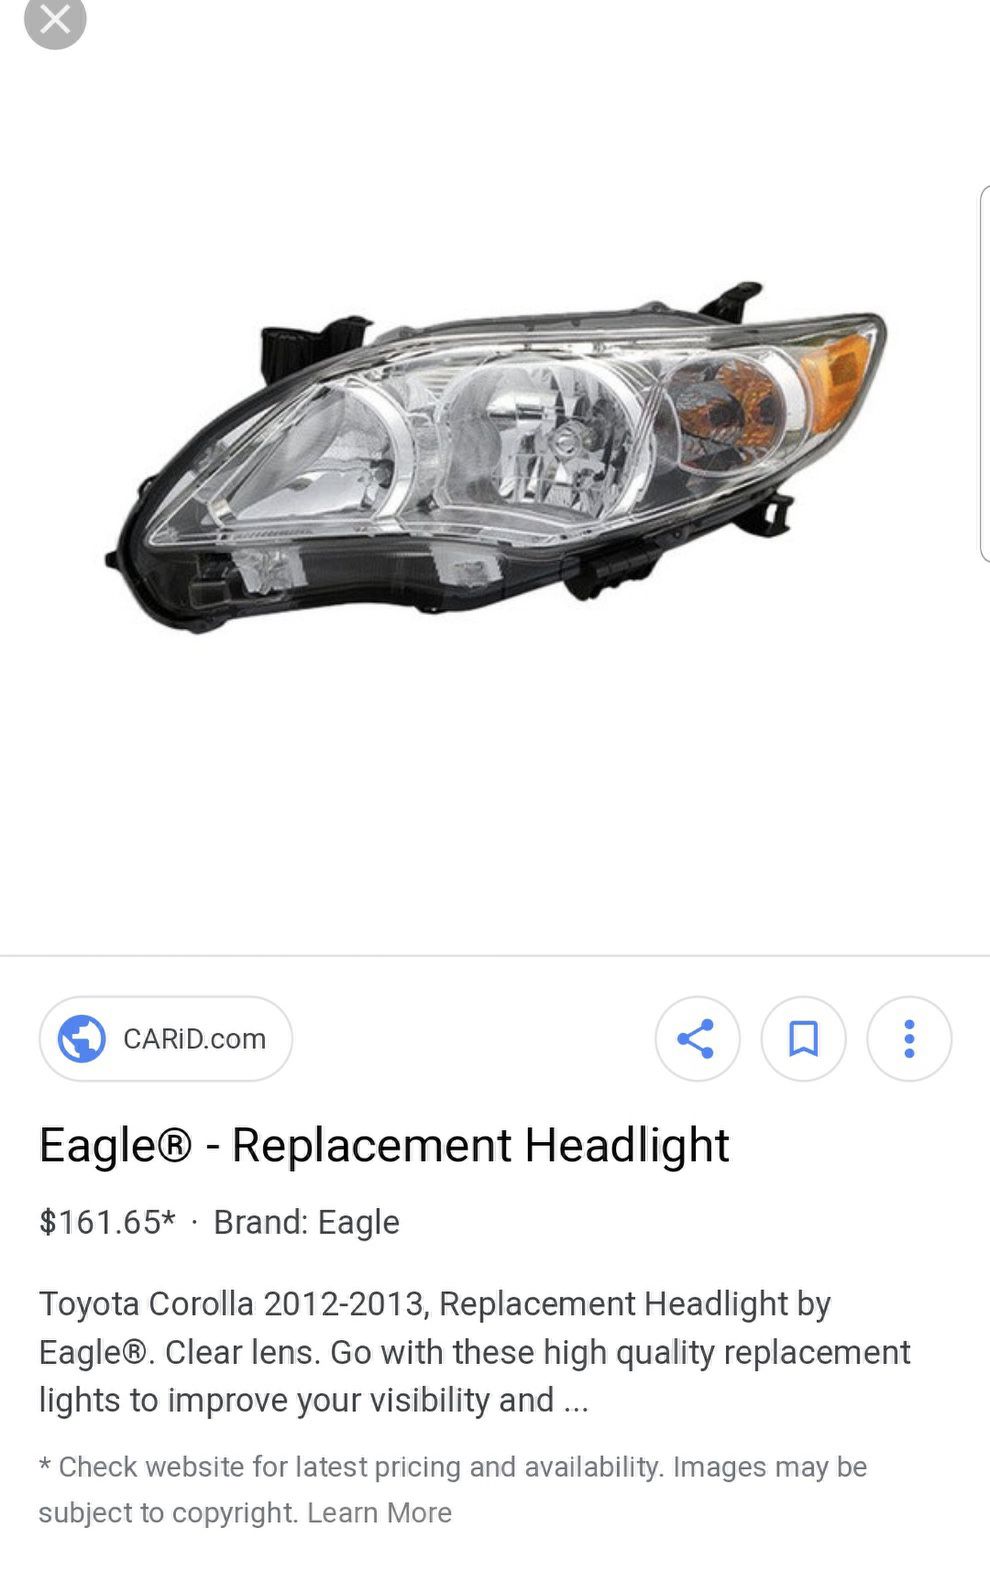 Eagle replacement headlights (set)